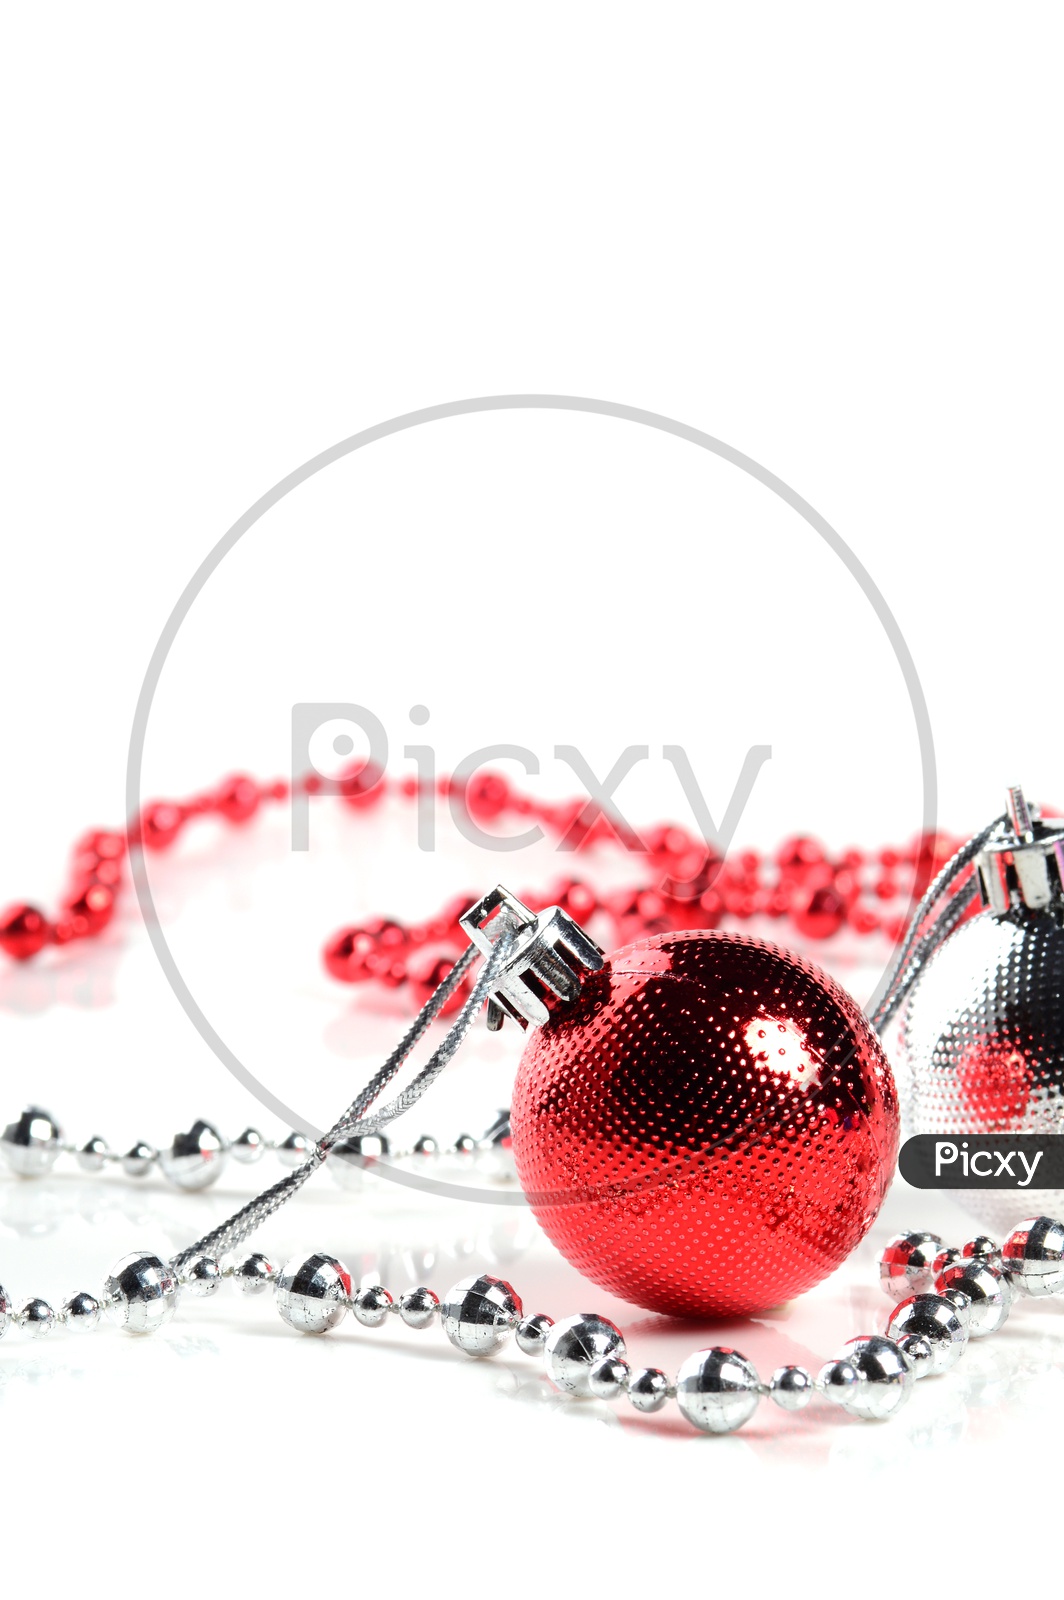 Christmas Tree Decoration Balls, Ornaments and Chains on an Isolated White Background